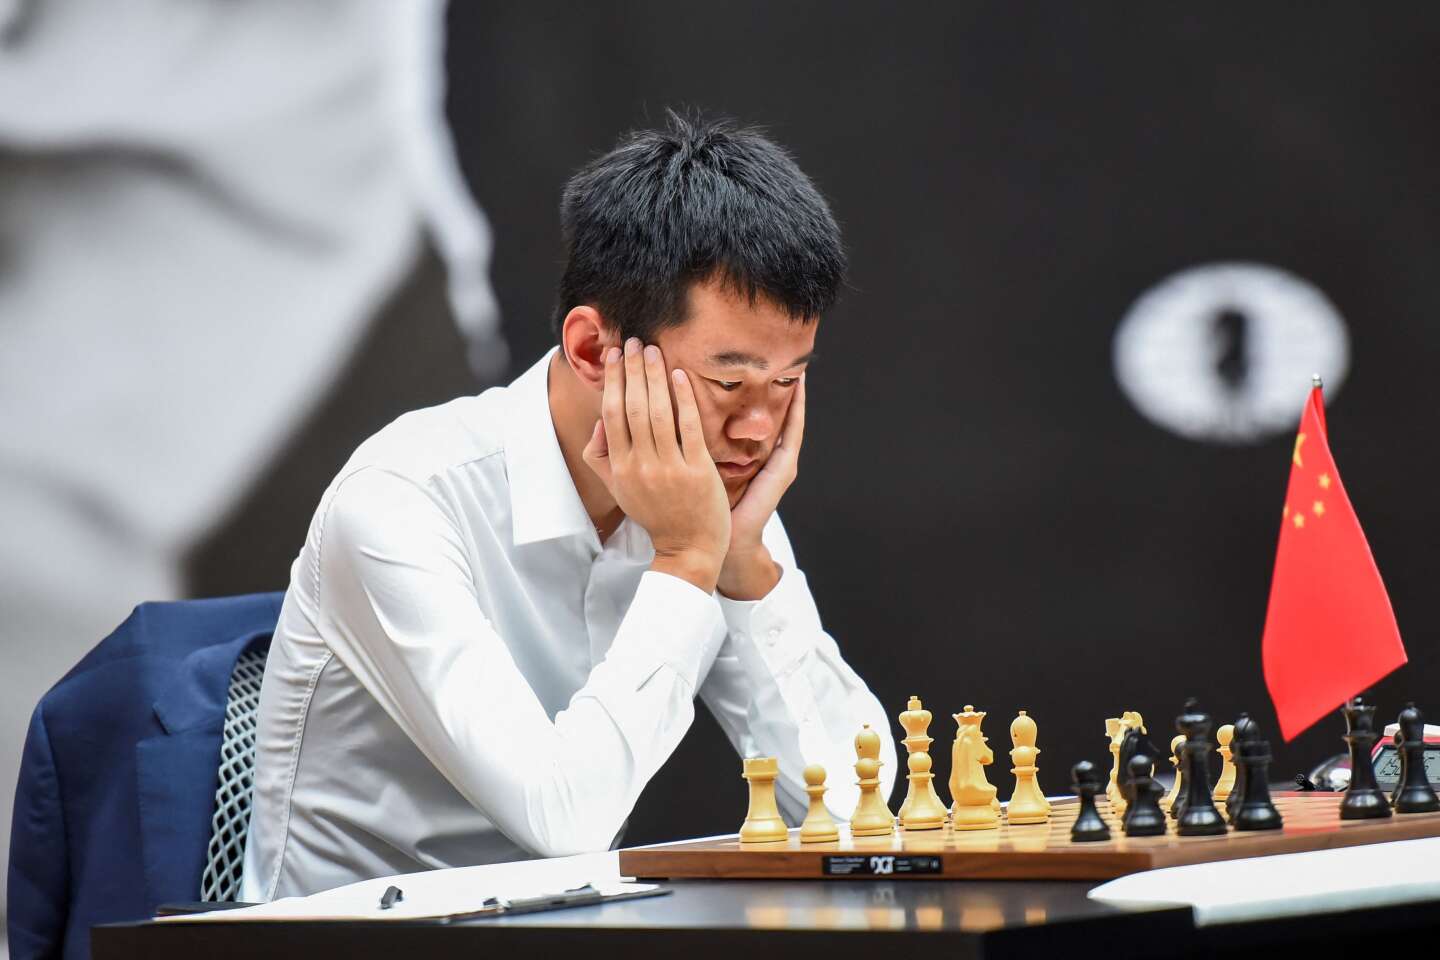 World Chess Championship 2023 Highlights: After five hours, Ding